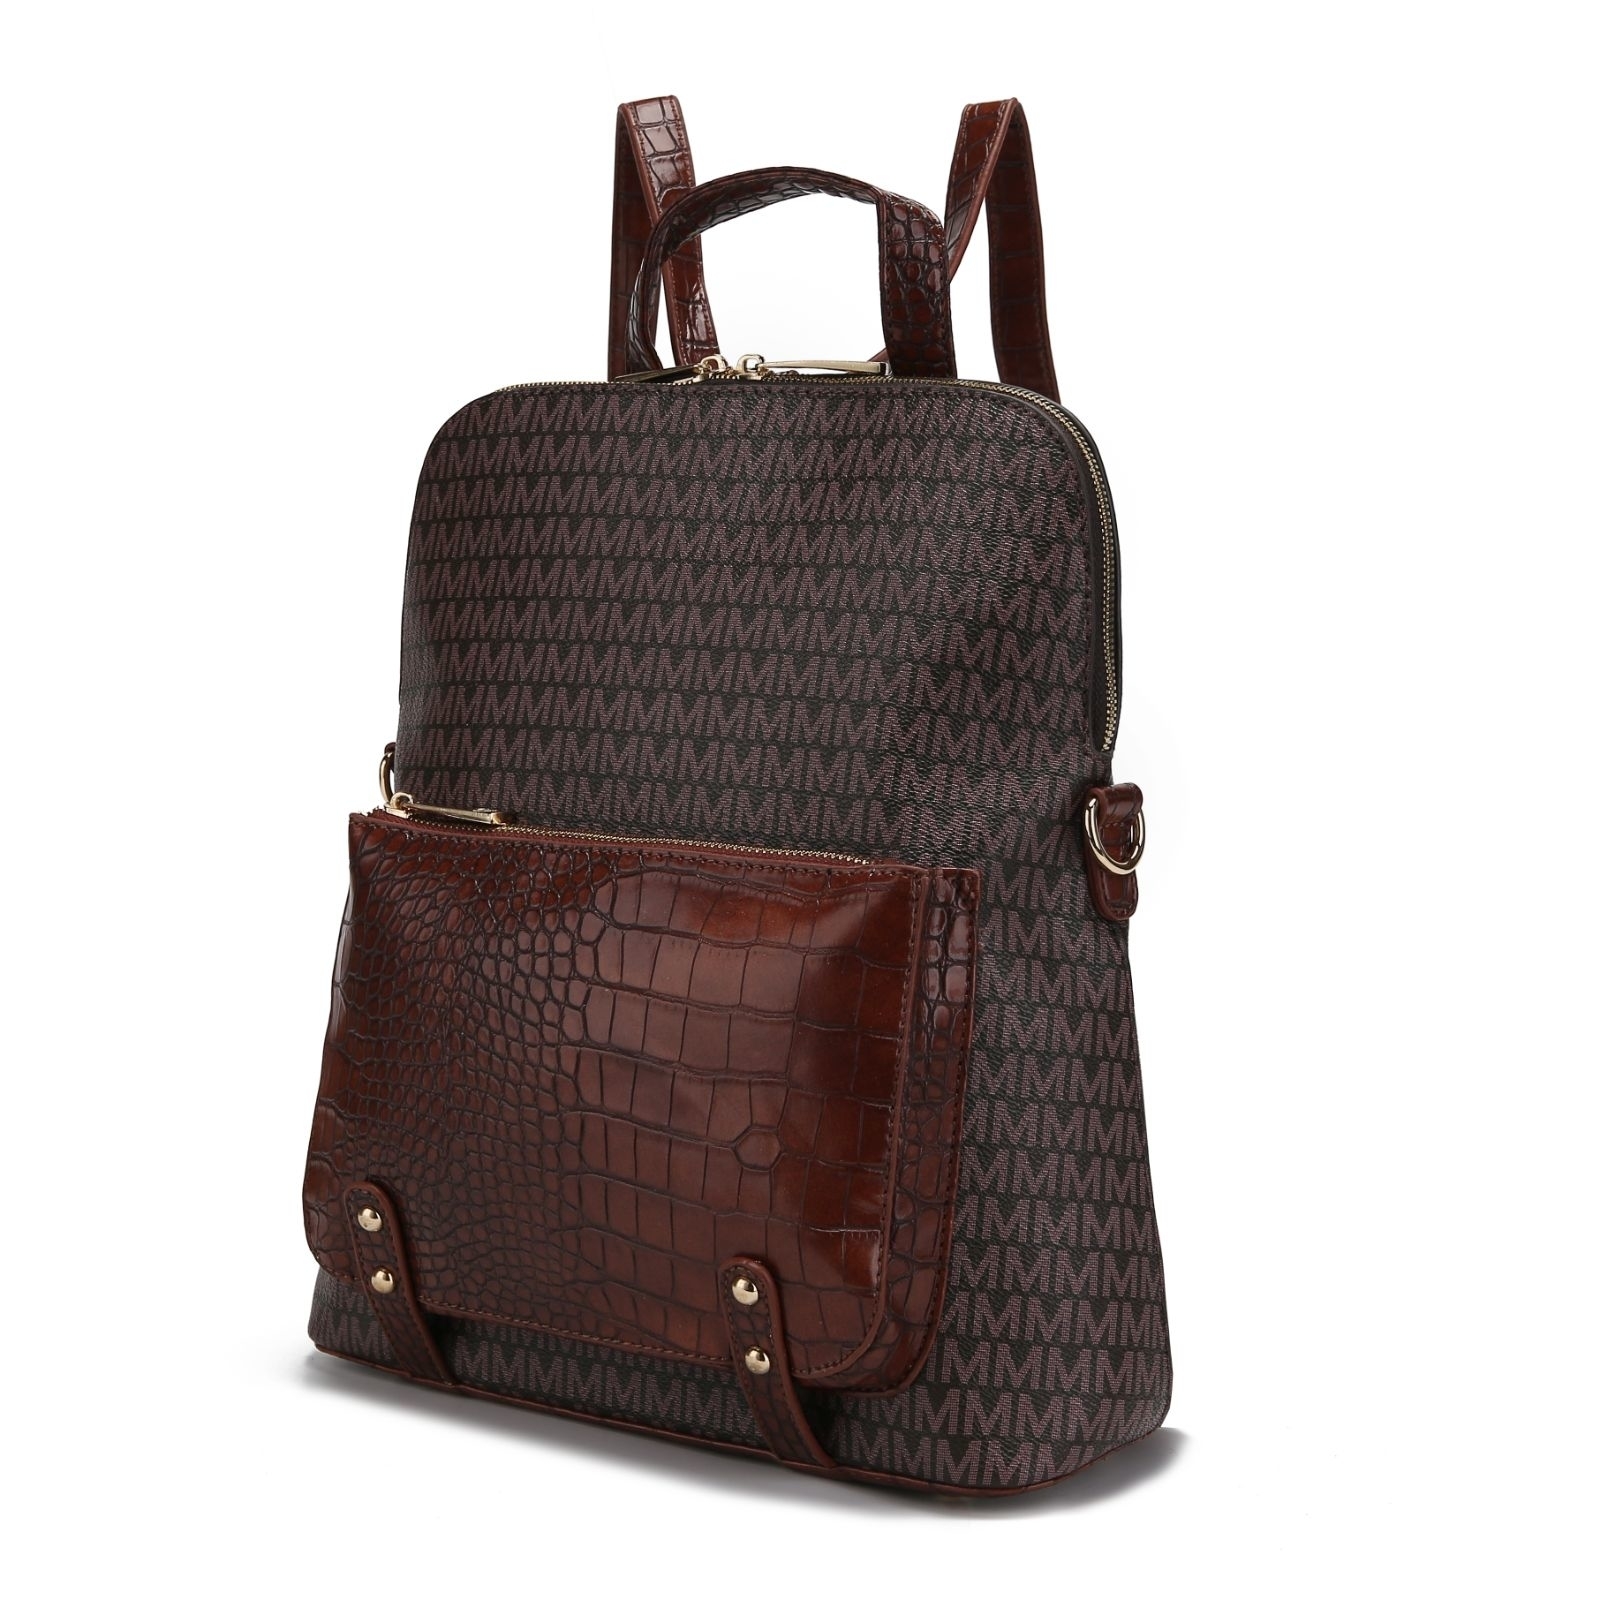 Mia K. Collection&nbsp;Rede Signature Backpack - image 4 of 10